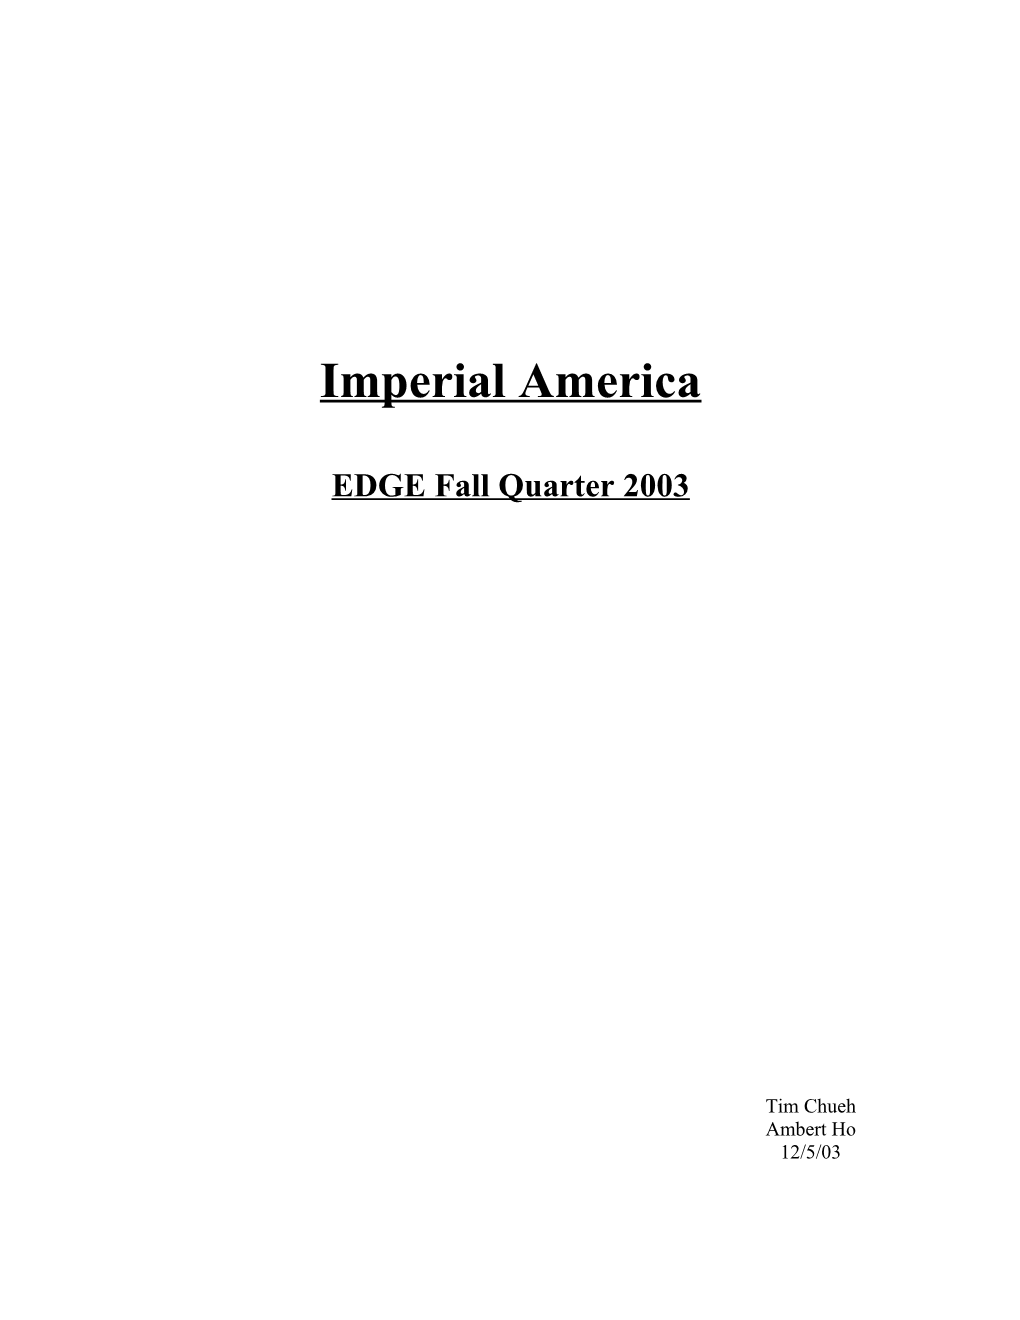 What Is Imperialism, and How Does It Fit in the American Context